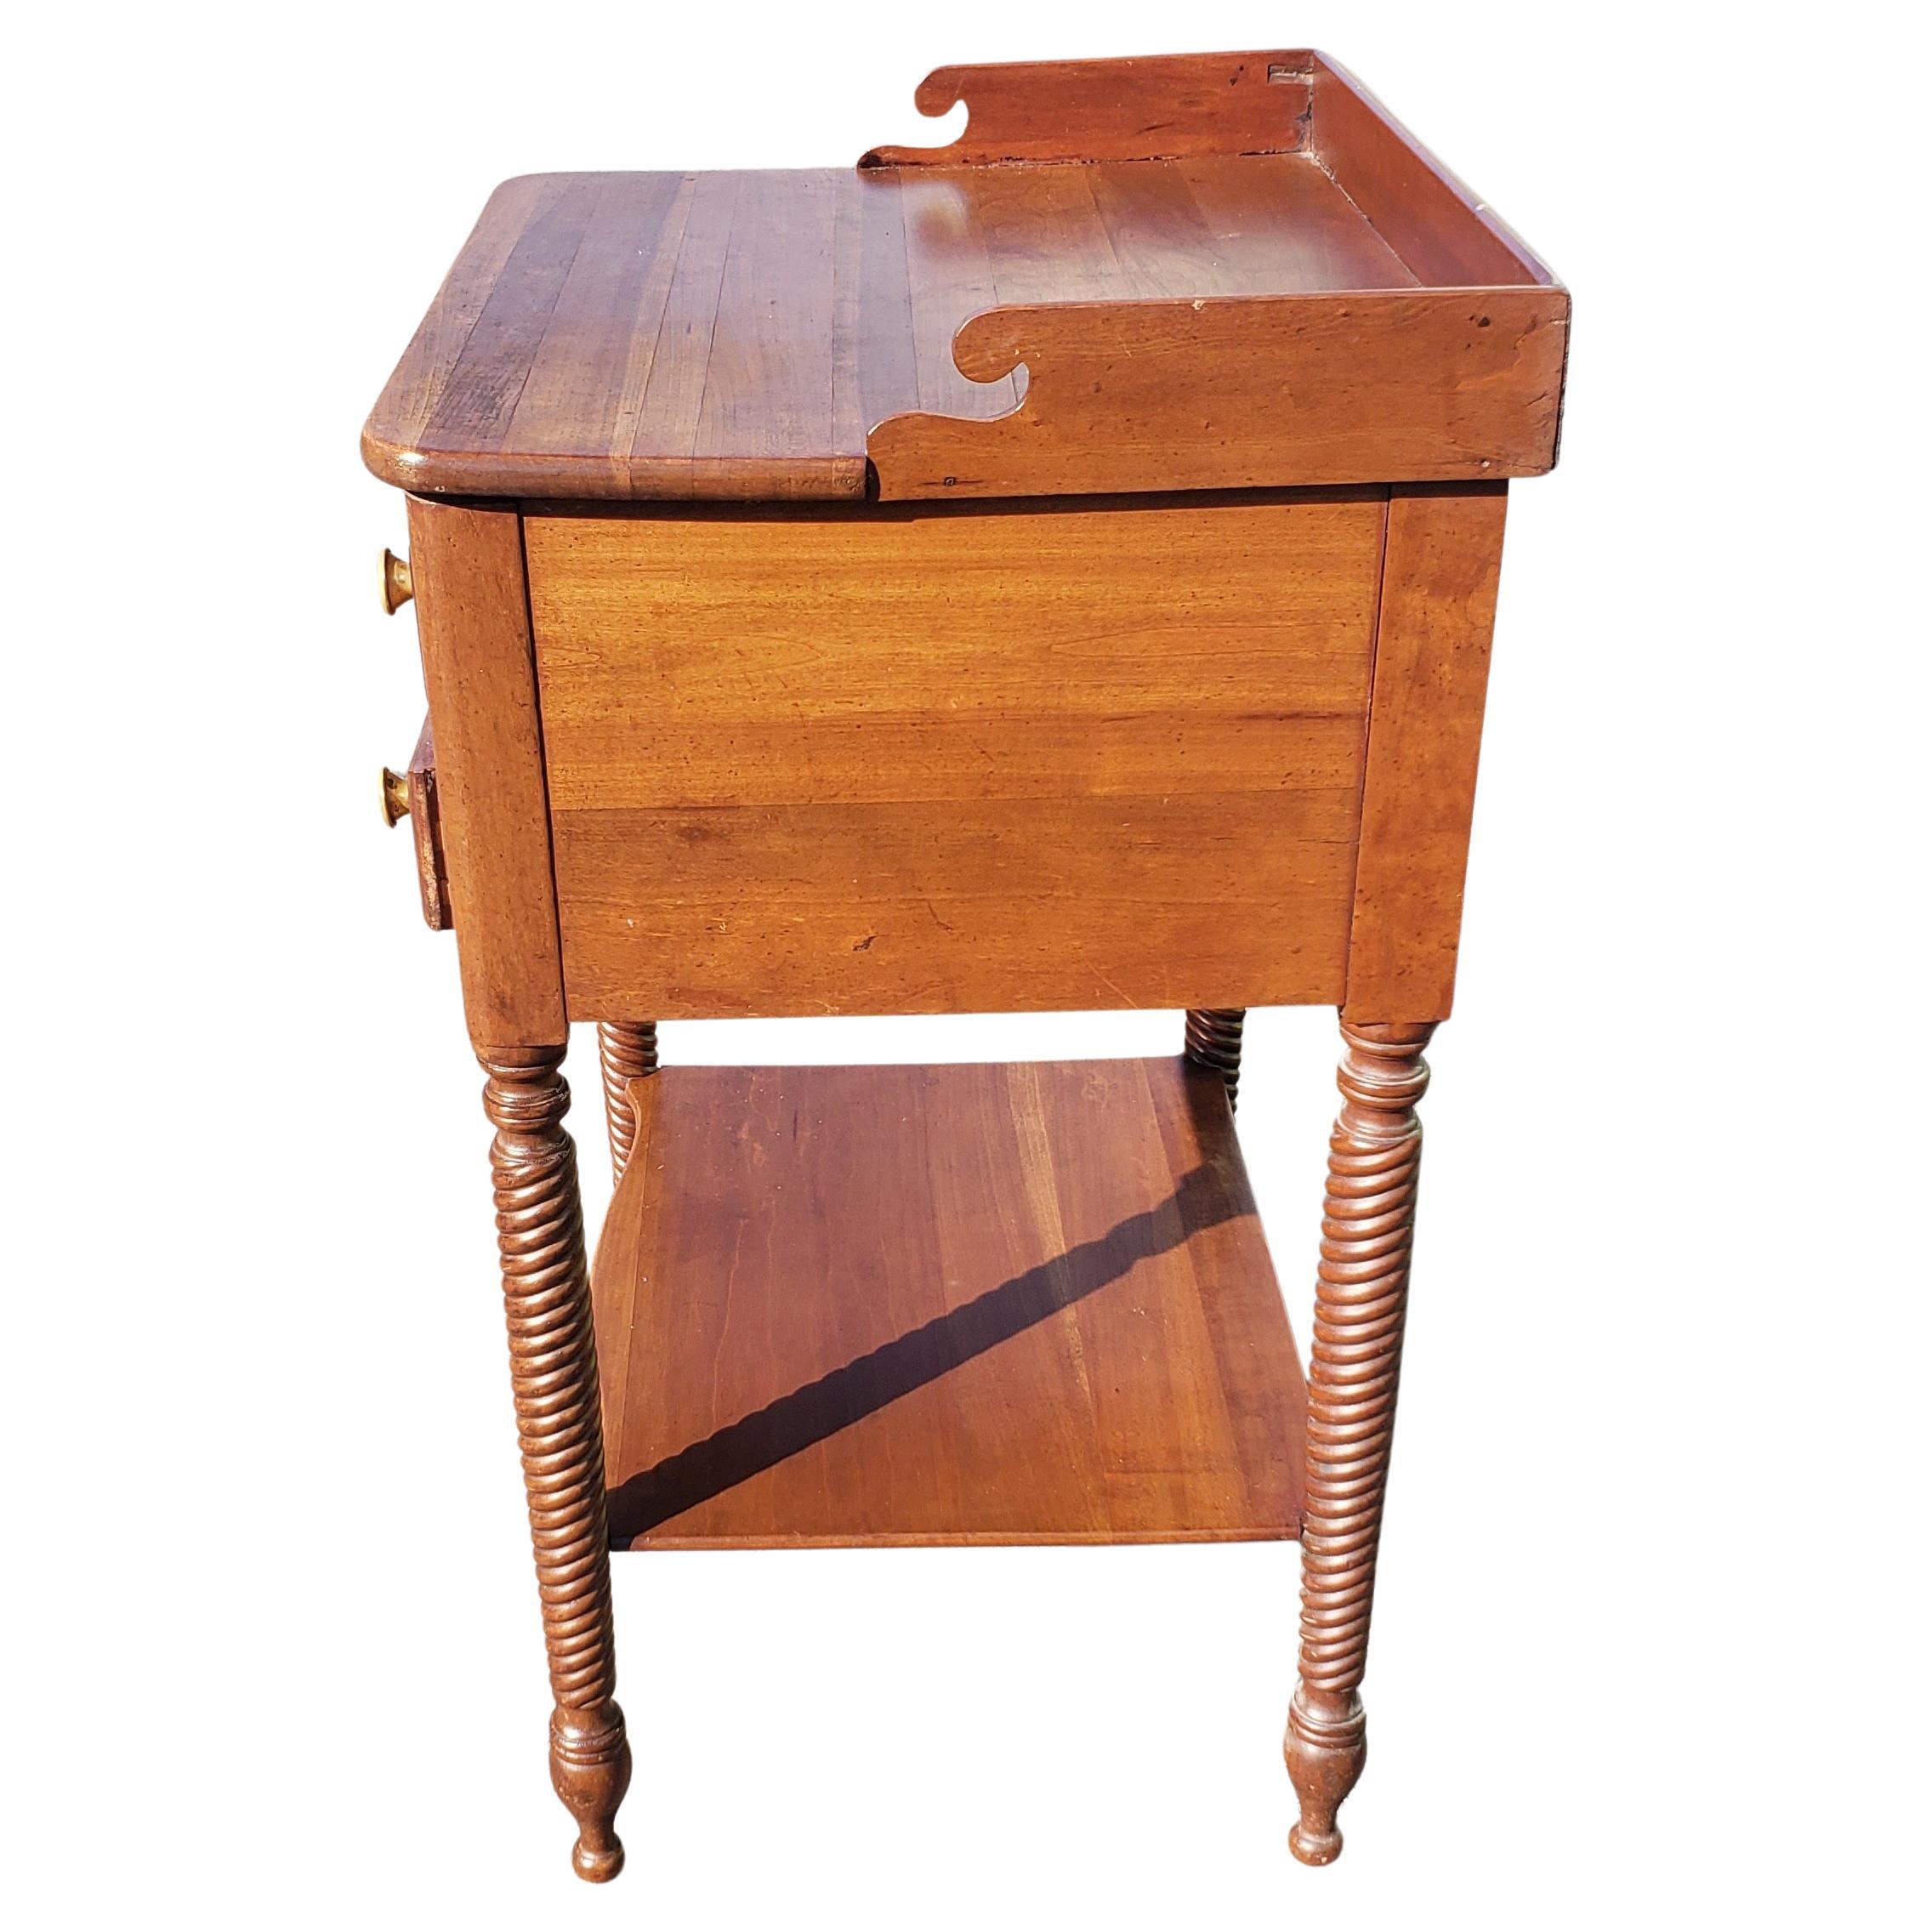 20th Century 1950s Willett Furniture Wildwood Cherry Two-Drawer Side Table / Washstand